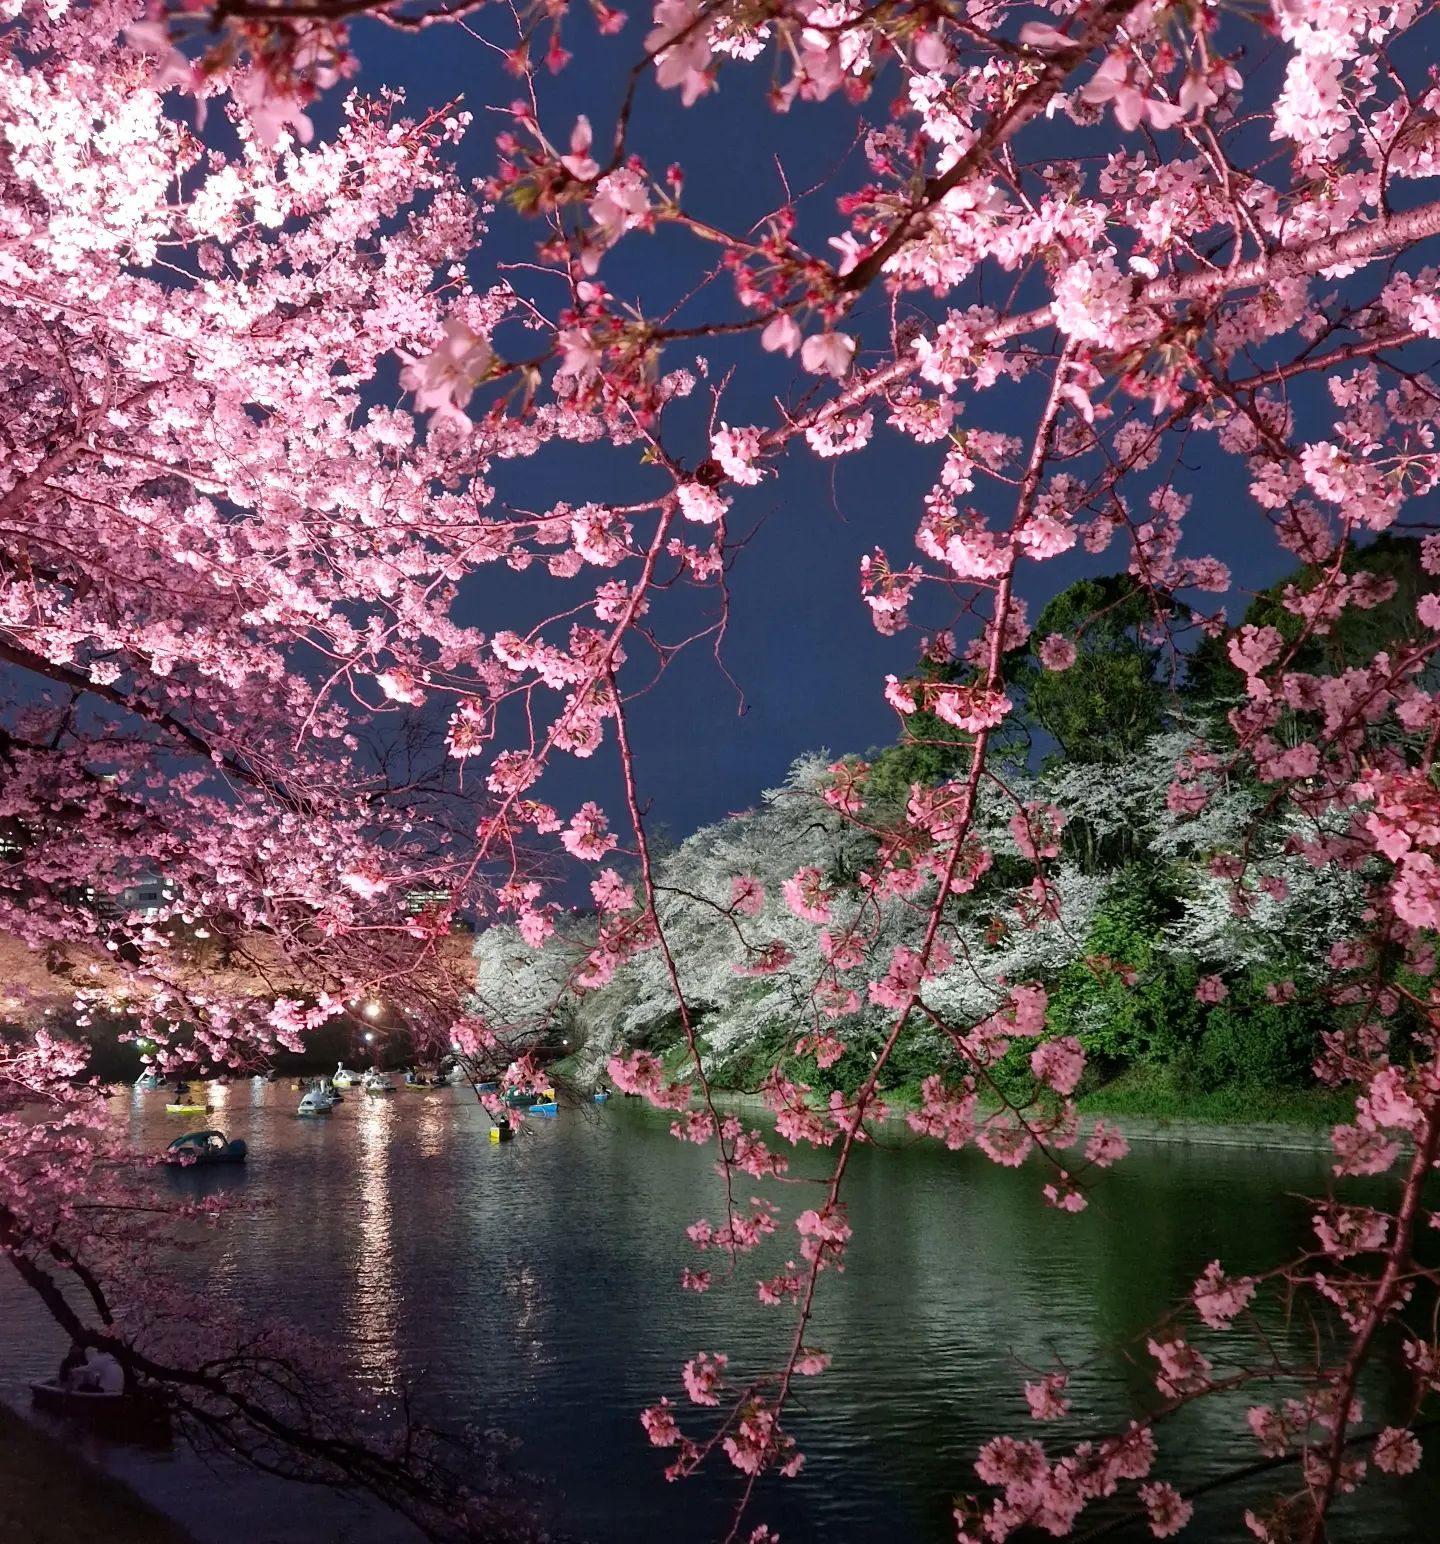 Forget Japan Or Korea If You Want To Catch The Cherry Blossoms